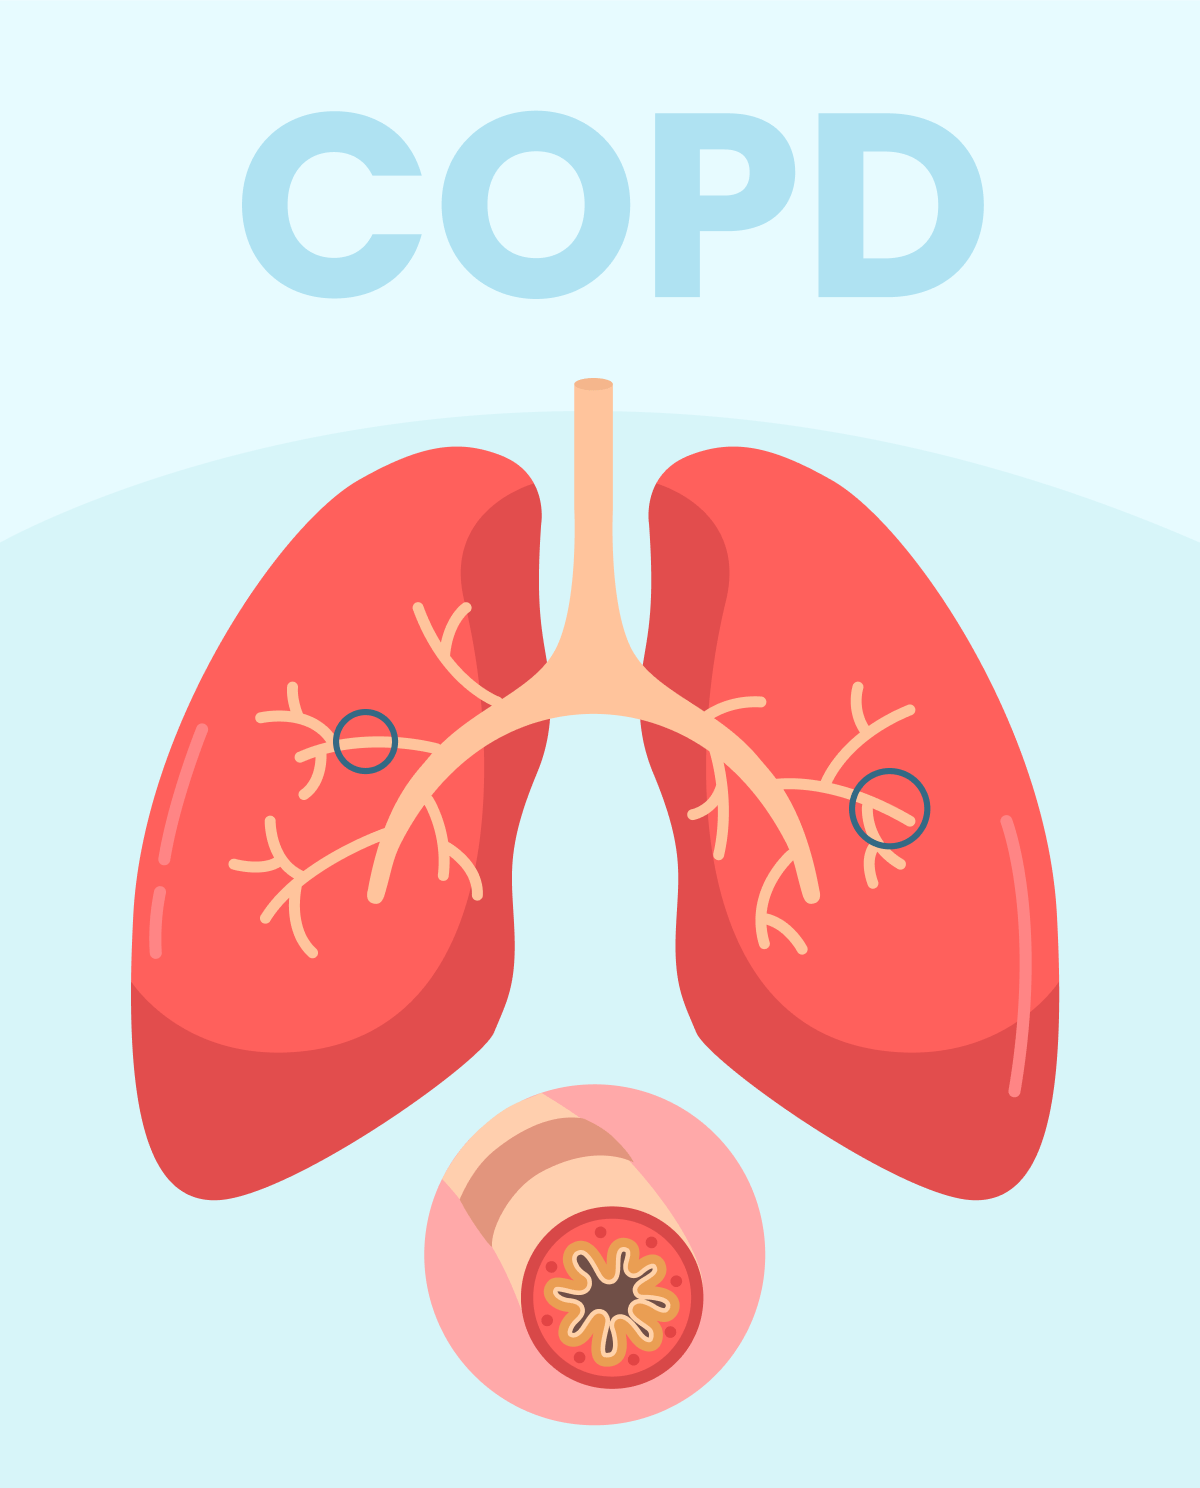 Chronic Obstructive Pulmonary Disease Overview